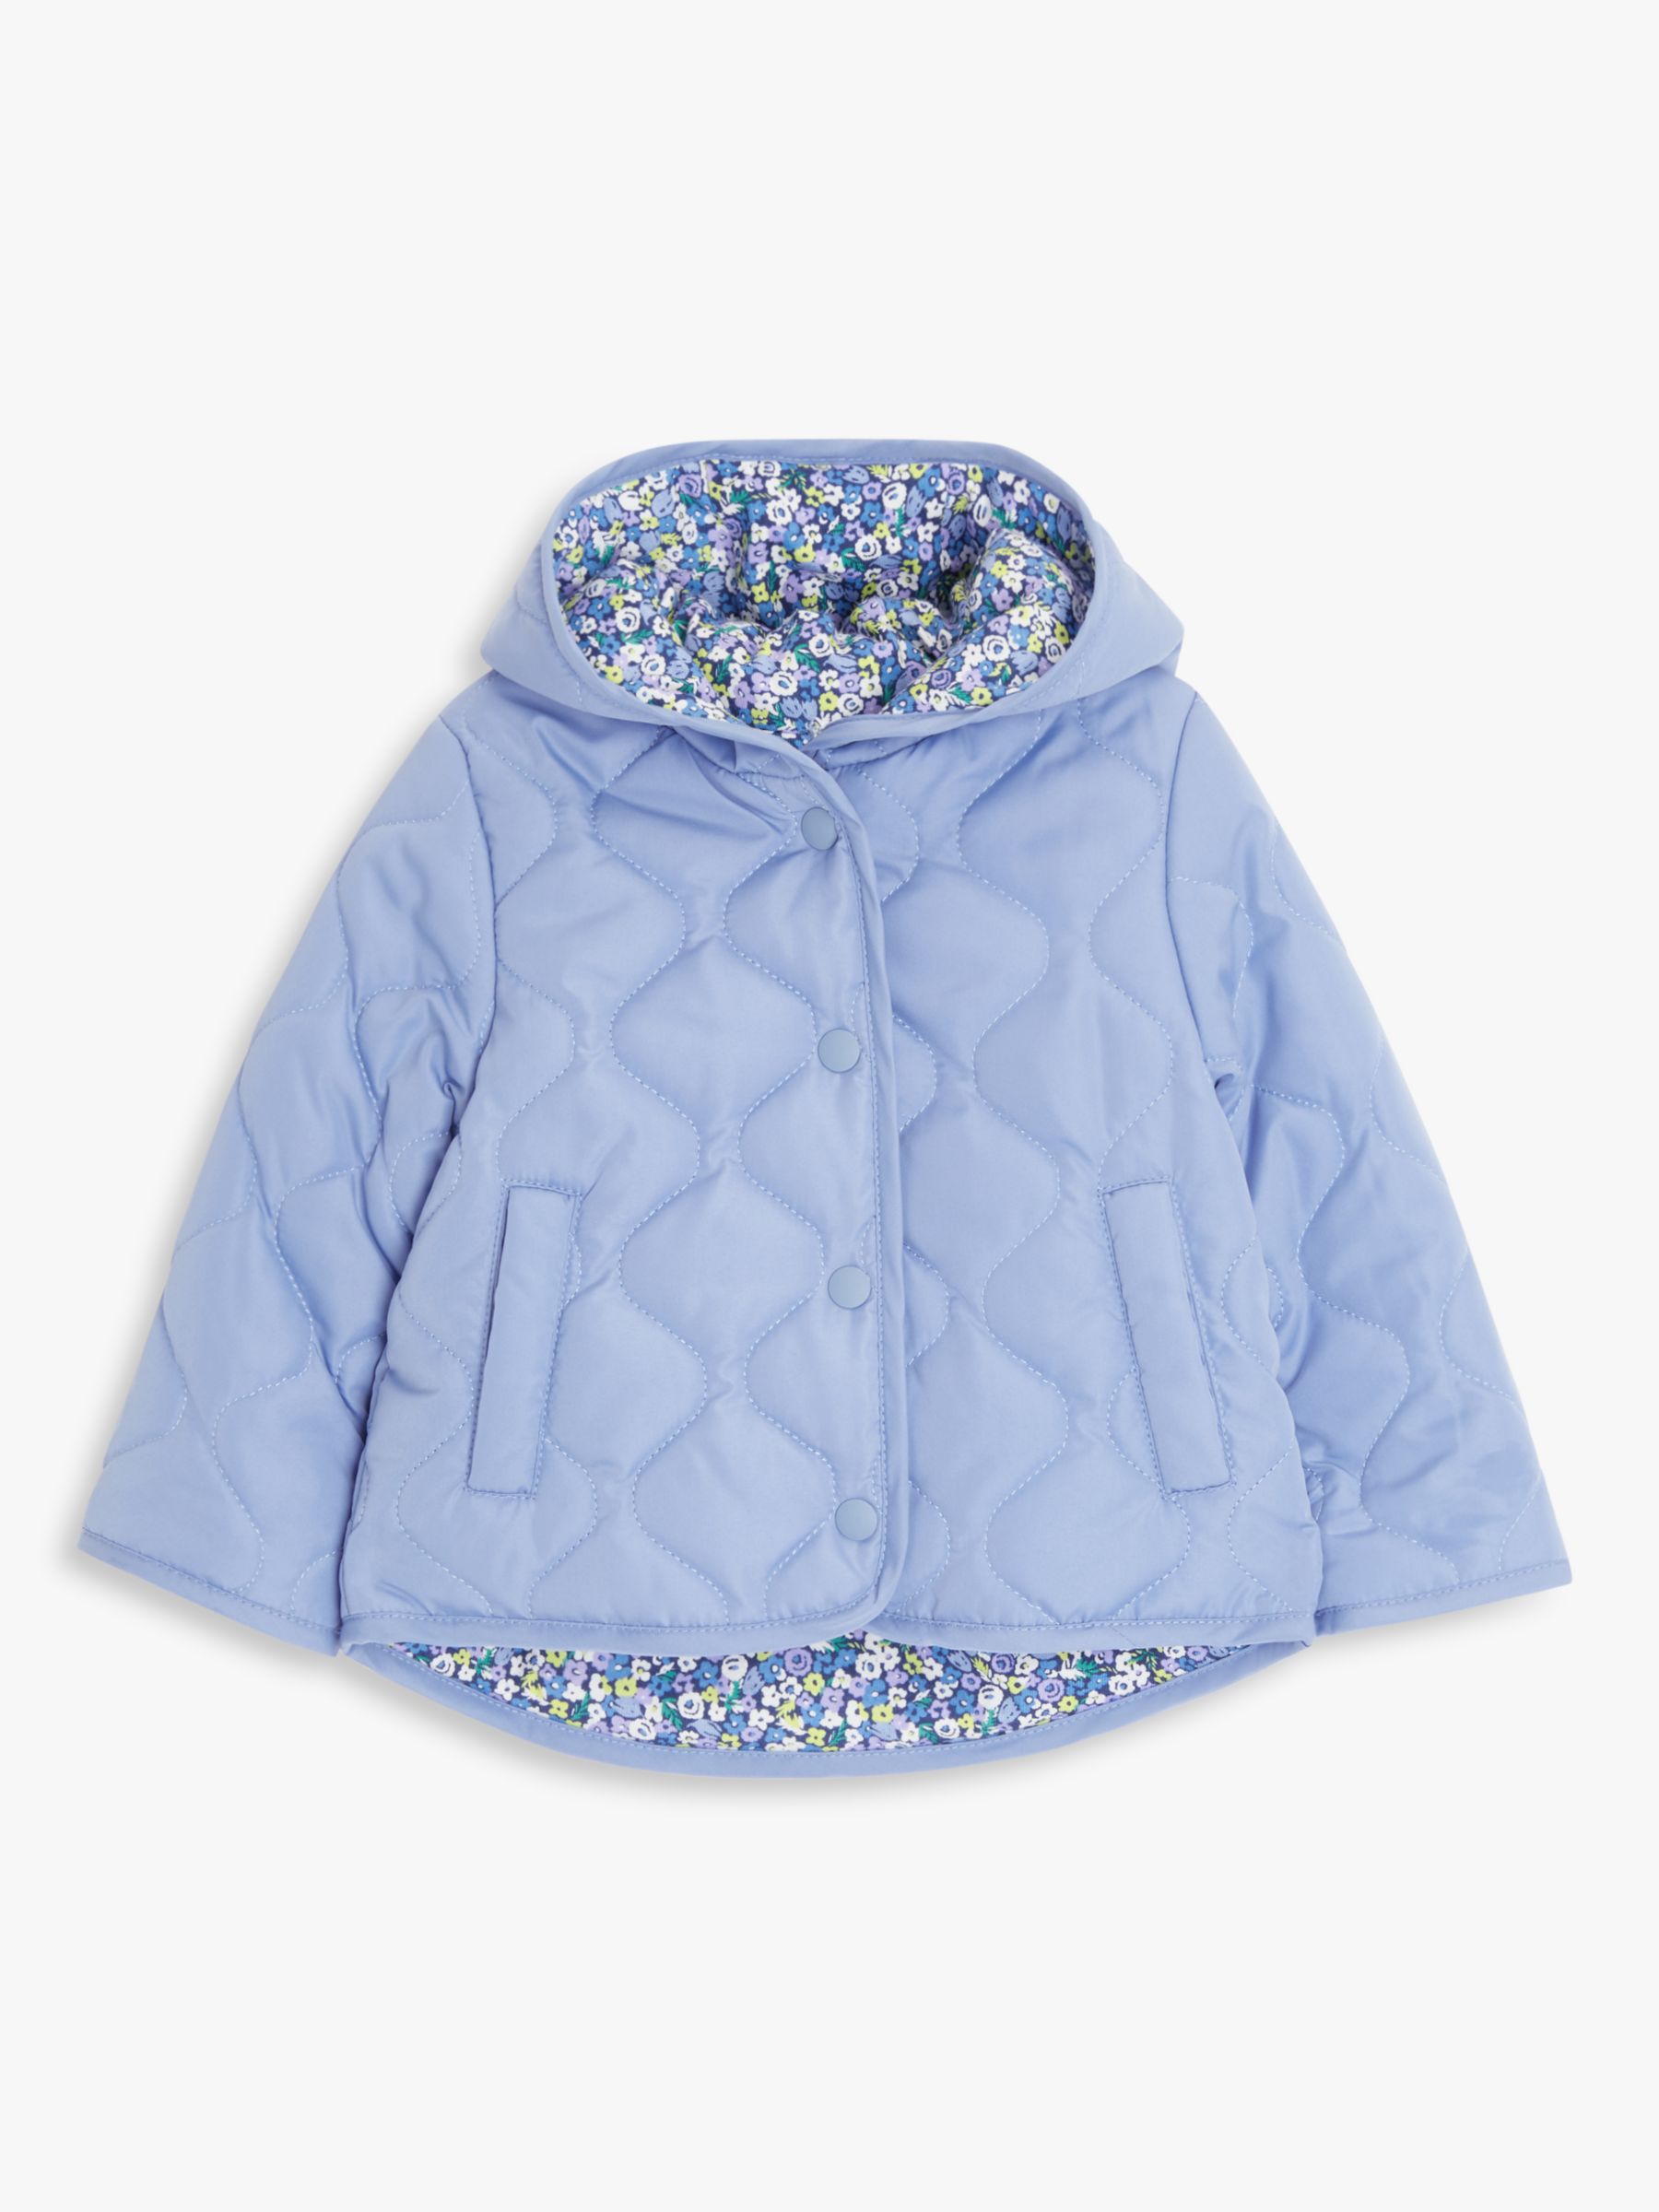 John Lewis Baby Reversible Quilted Jacket, Blue £25.00 - £27.00